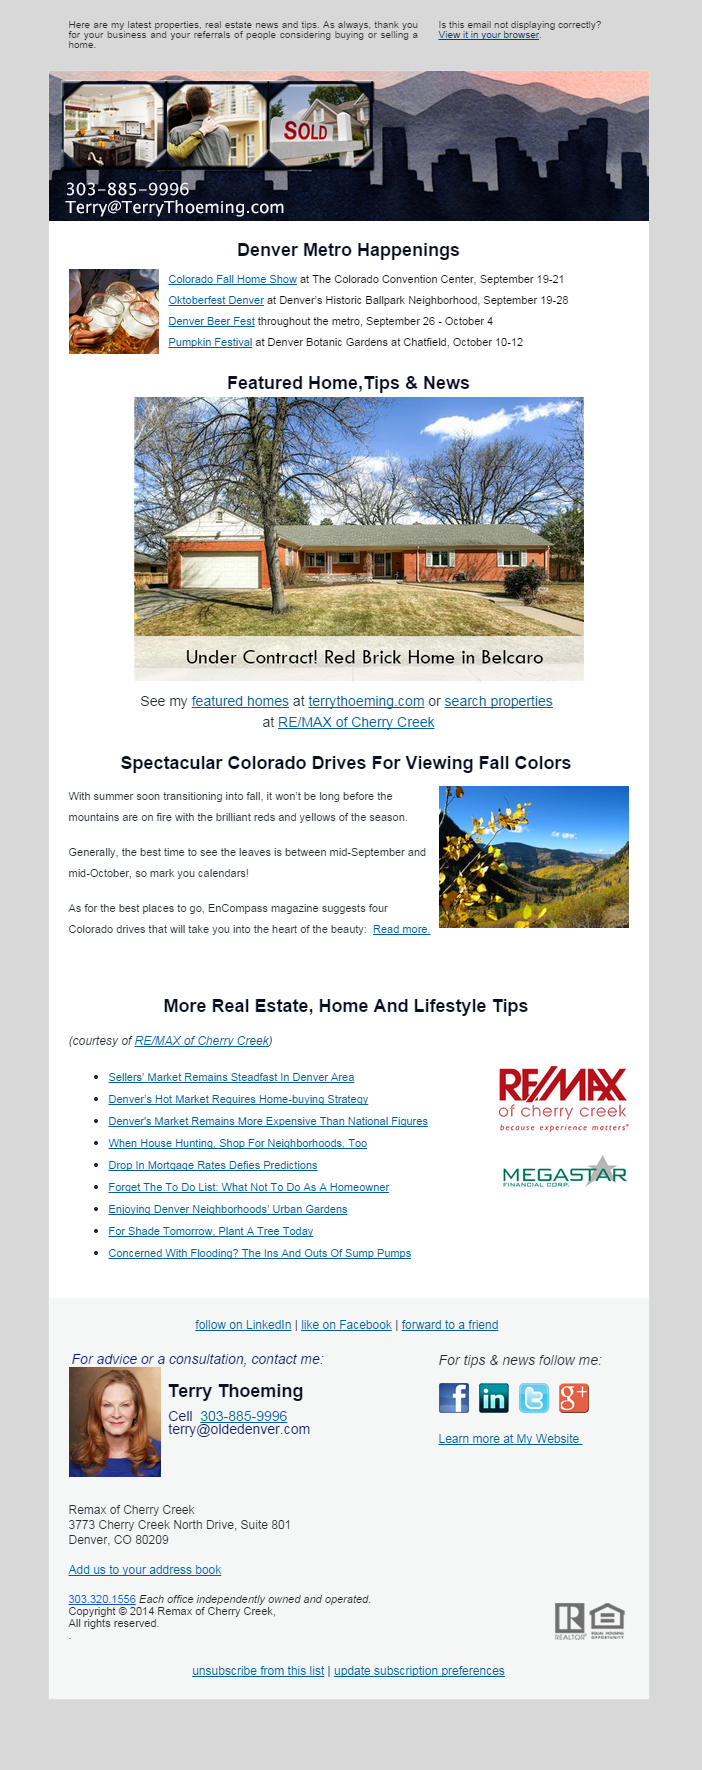 My Featured Home + Spectacular Colorado Drives For Viewing Fall Colors